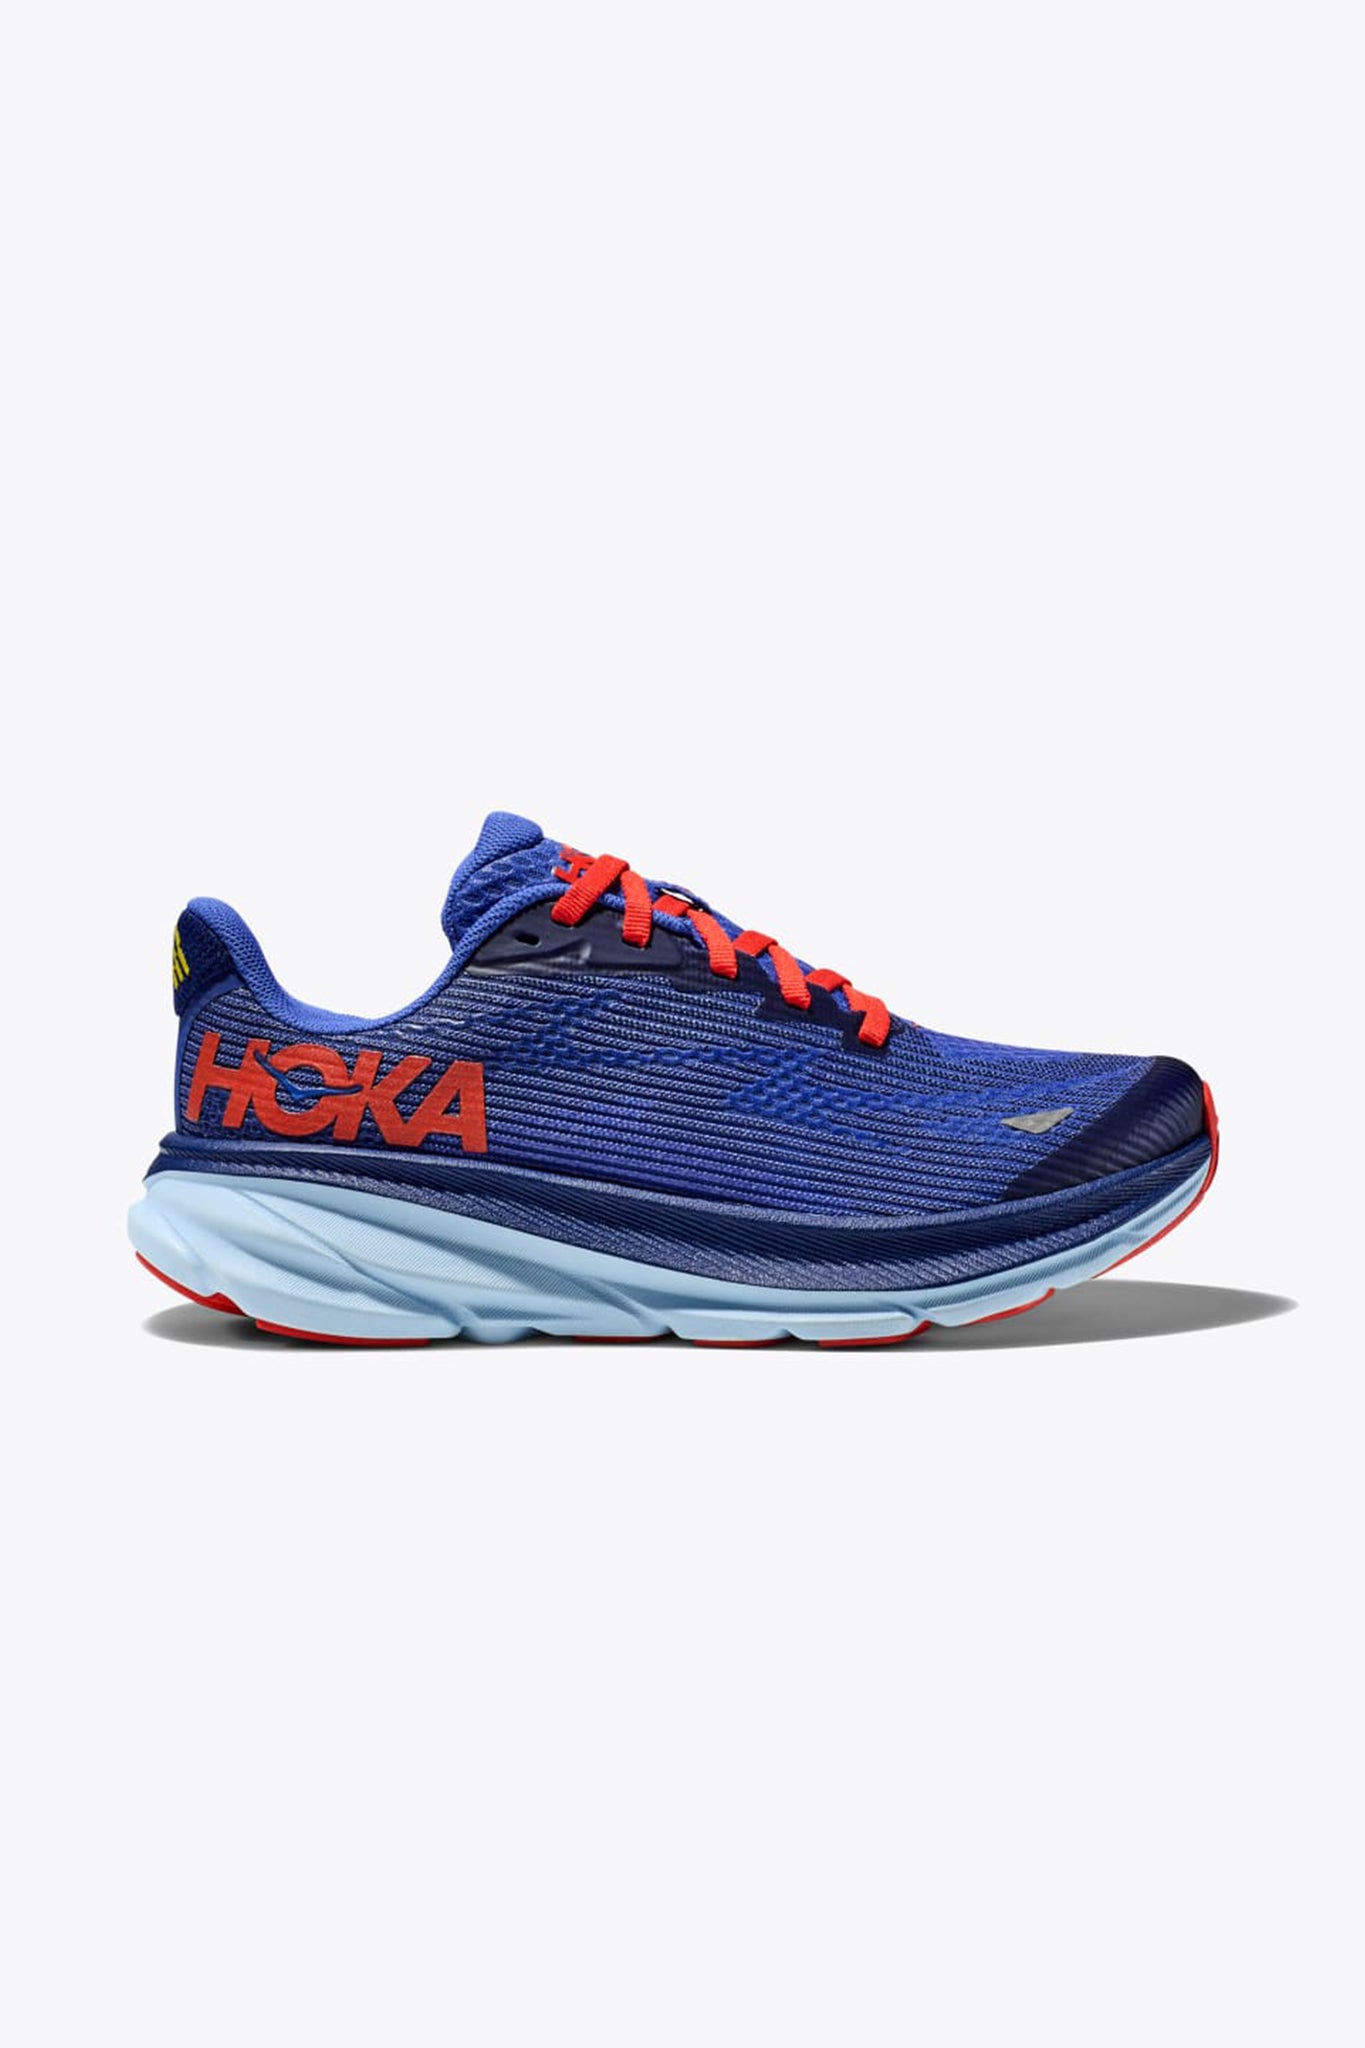 Hoka Kid's Clifton 9 in Bellwether Blue/Dazzling Blue